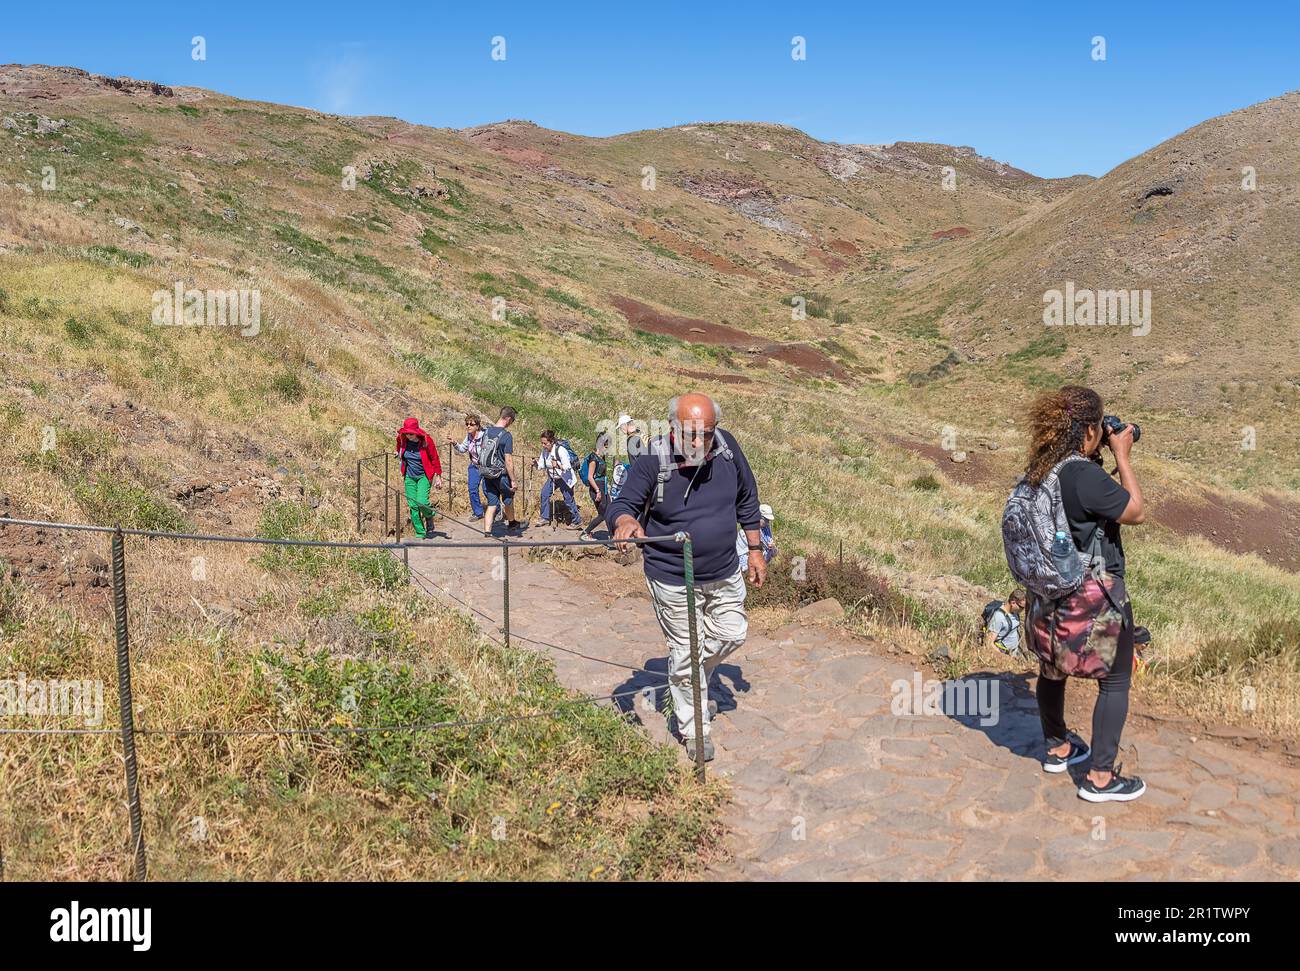 Madeira Island Portugal - 04 19 2023: Panoramic view of a group of tourists hiking in St. Lourenço Cape or Cabo de São Lourenço, on Madeira Island, Po Stock Photo